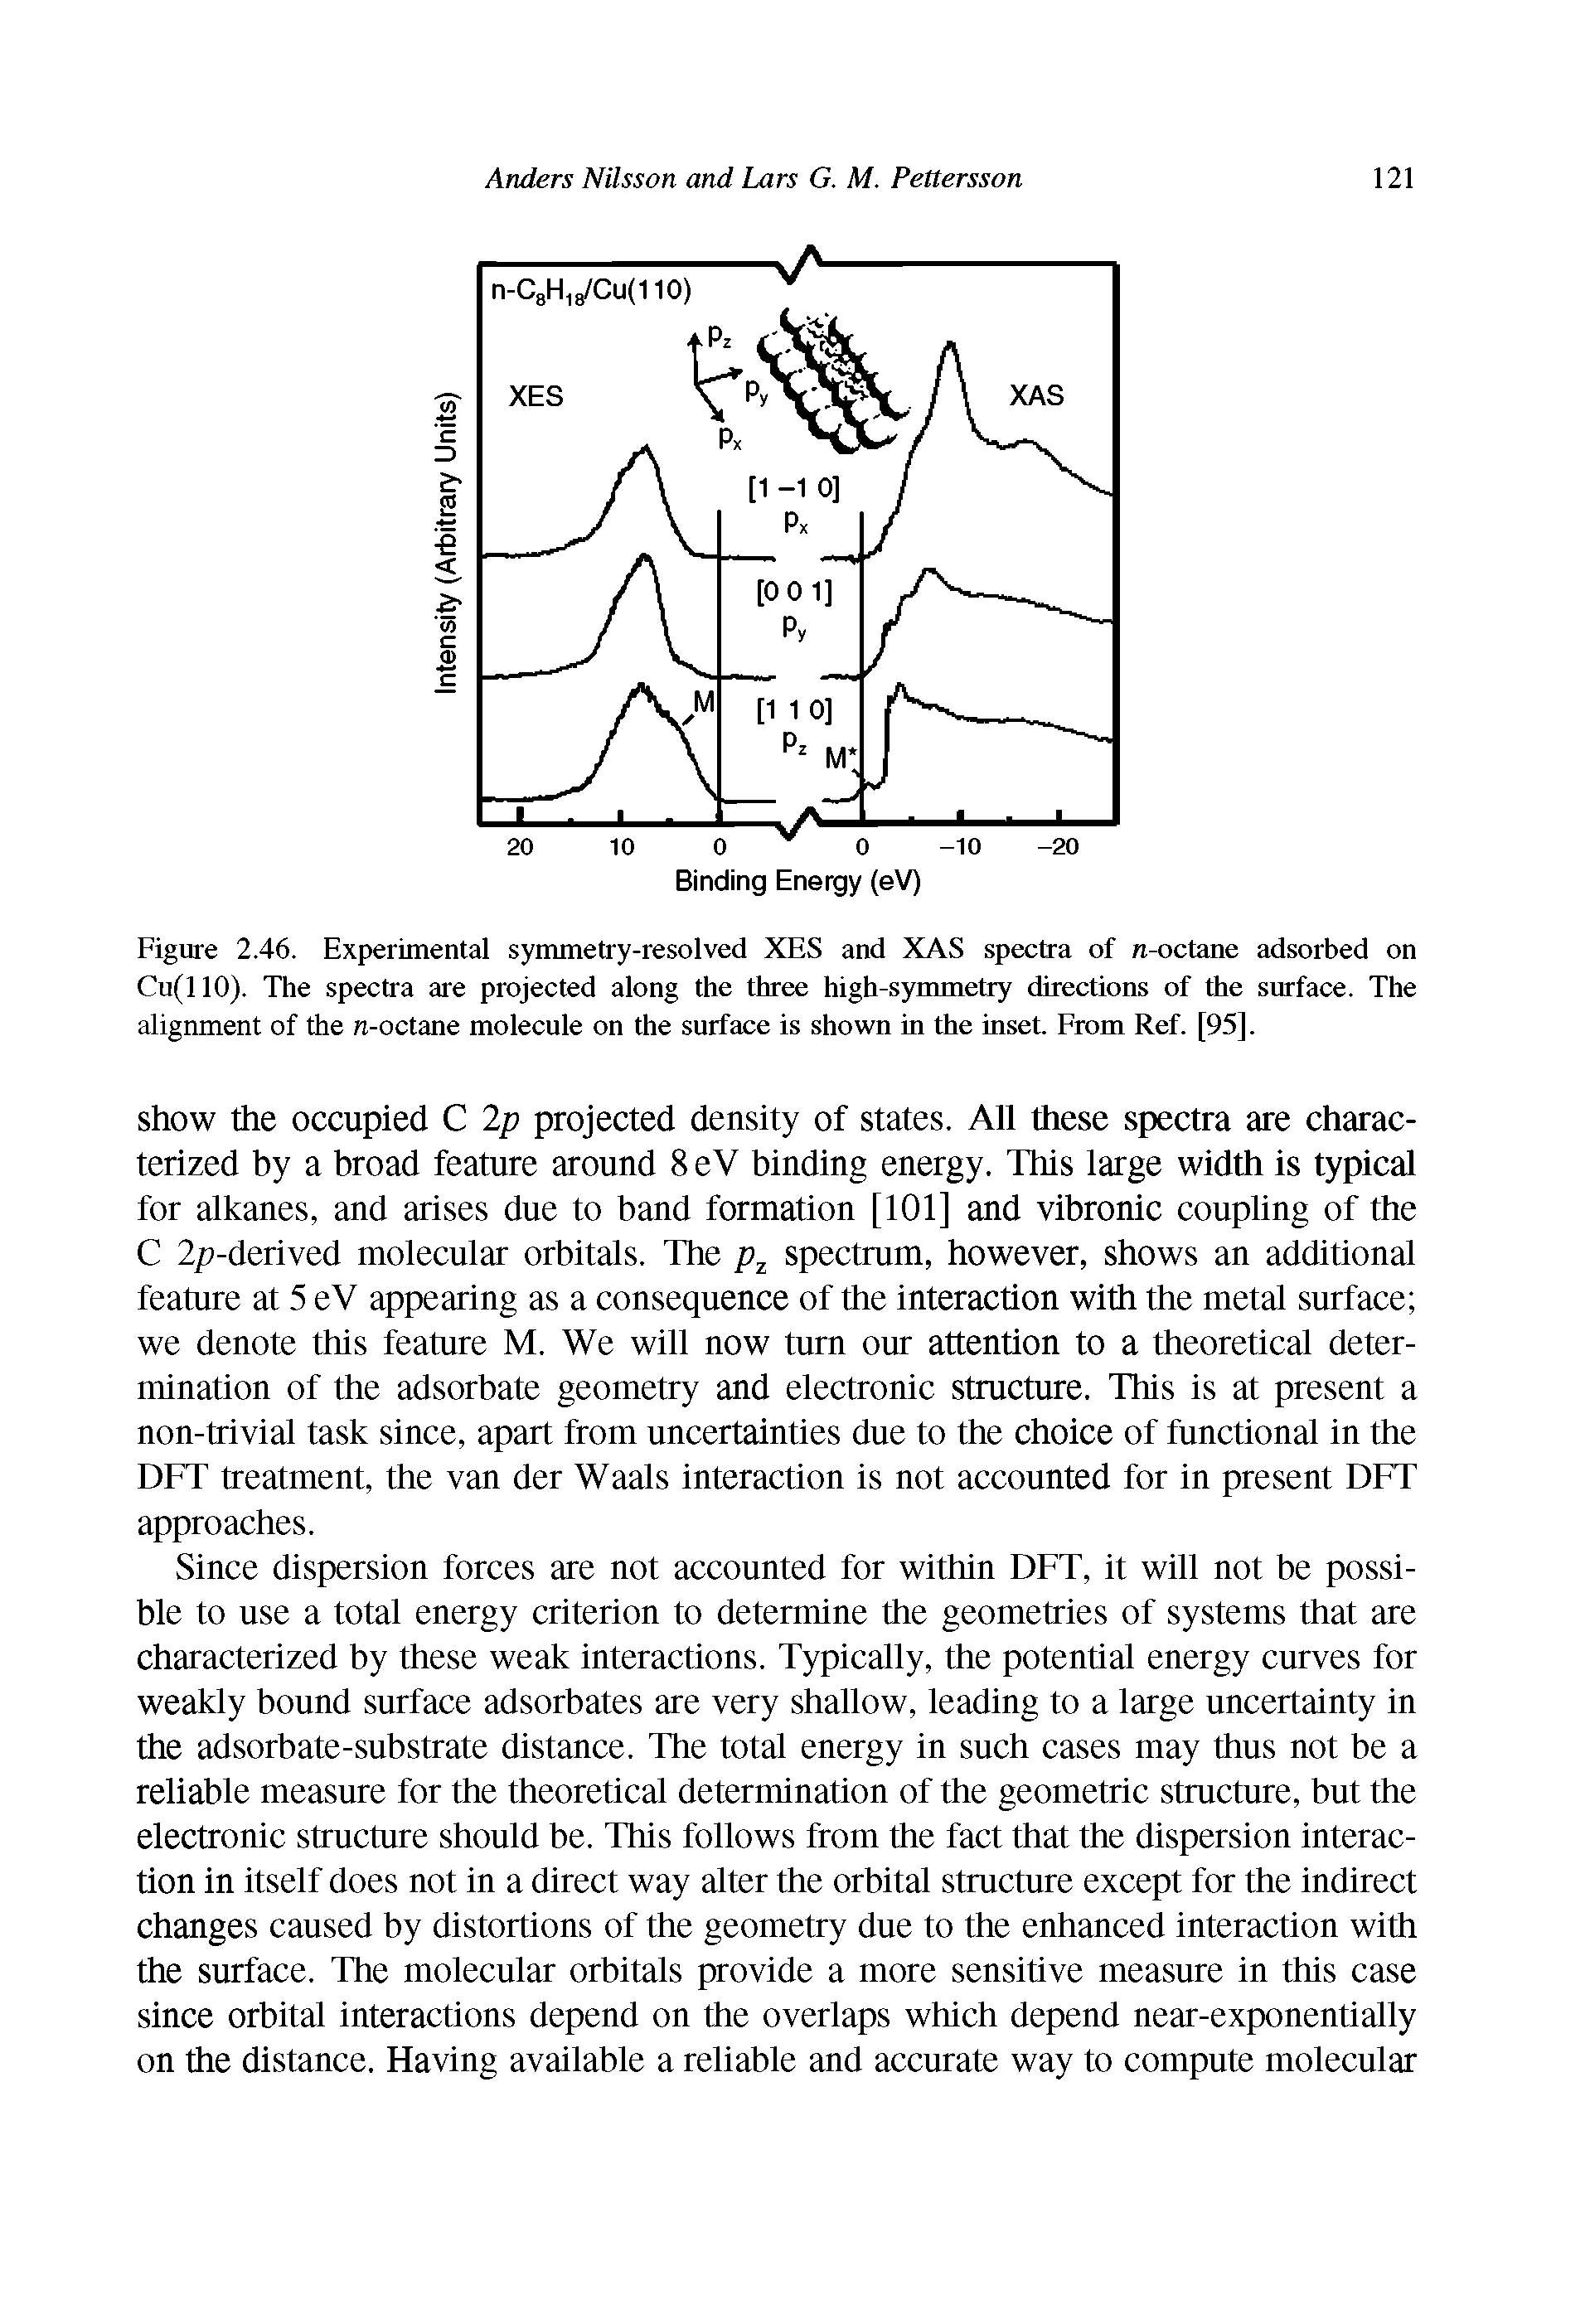 Figure 2.46. Experimental symmetry-resolved XES and XAS spectra of n-octane adsorbed on Cu(l 10). The spectra are projected along the three high-symmetry directions of the surface. The alignment of the n-octane molecule on the surface is shown in the inset. From Ref. [95].